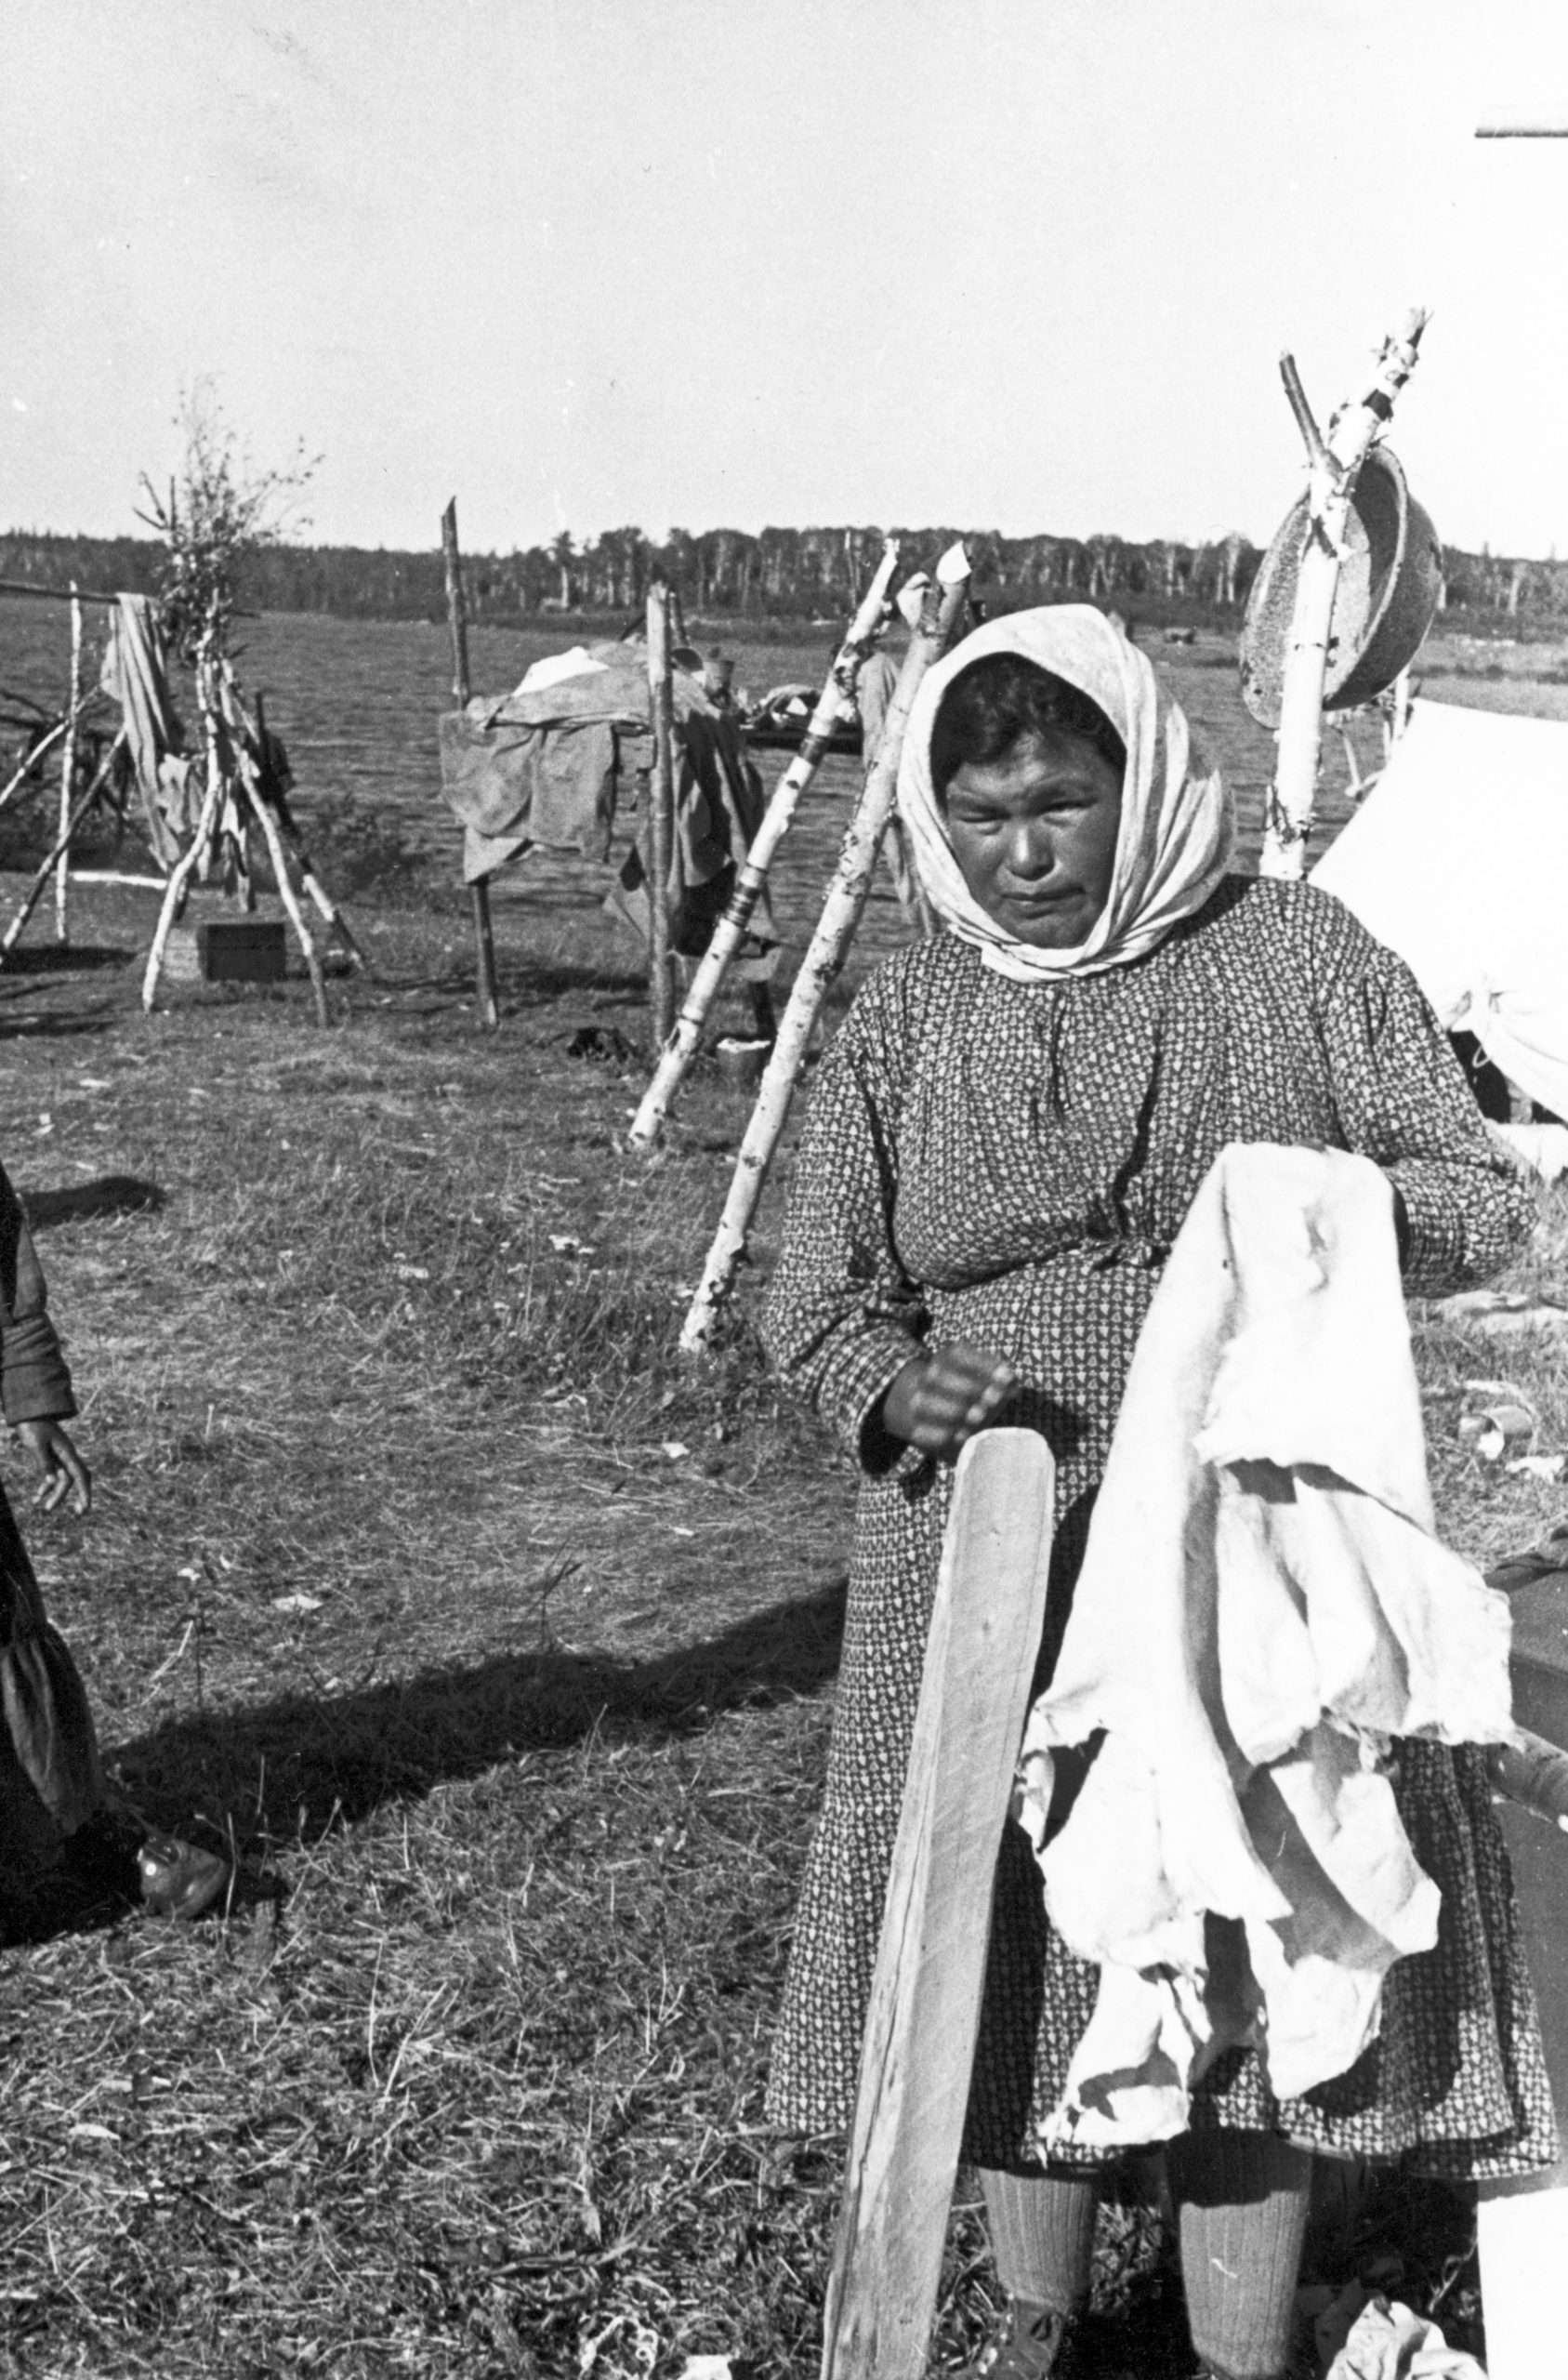 An Anicinabe woman with a tanned skin in her hands. She wears a long dress and a scarf on her head. We see a portion of a camp behind her with tents and wooden supports. Black and white picture.